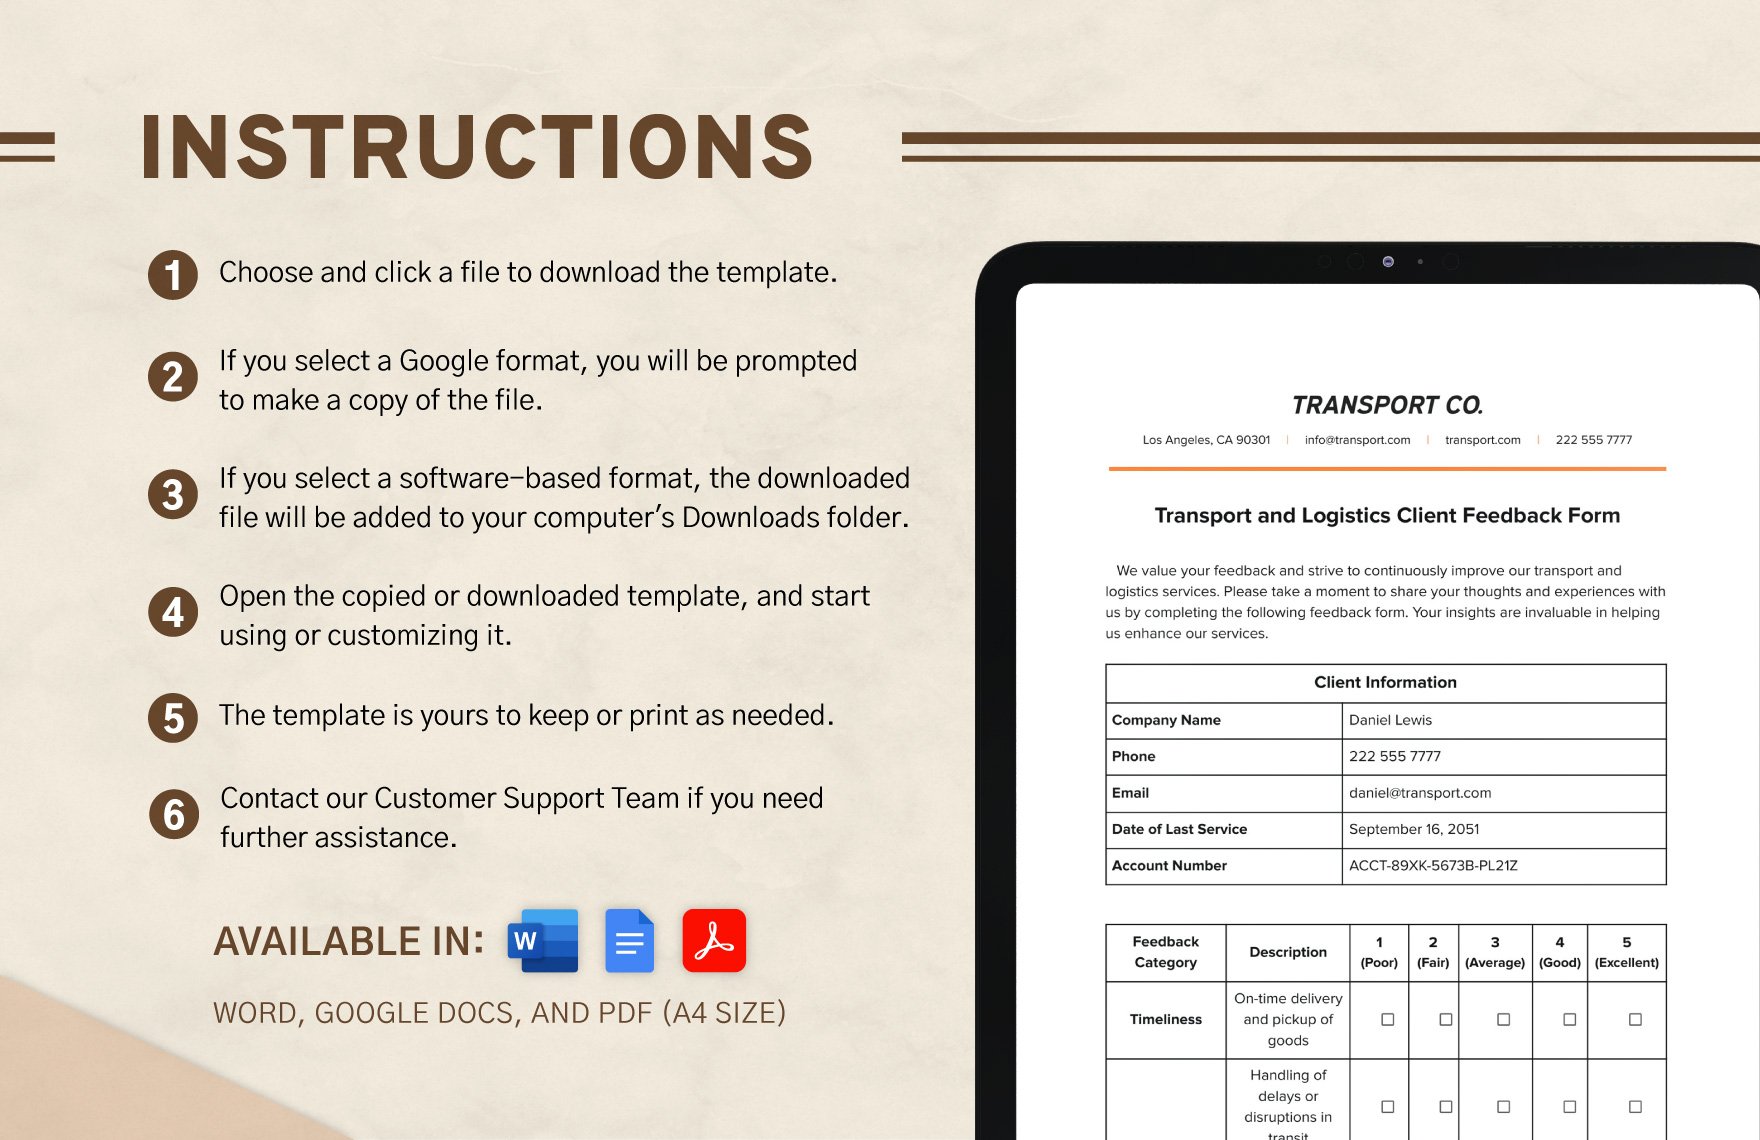 Transport and Logistics Client Feedback Form Template